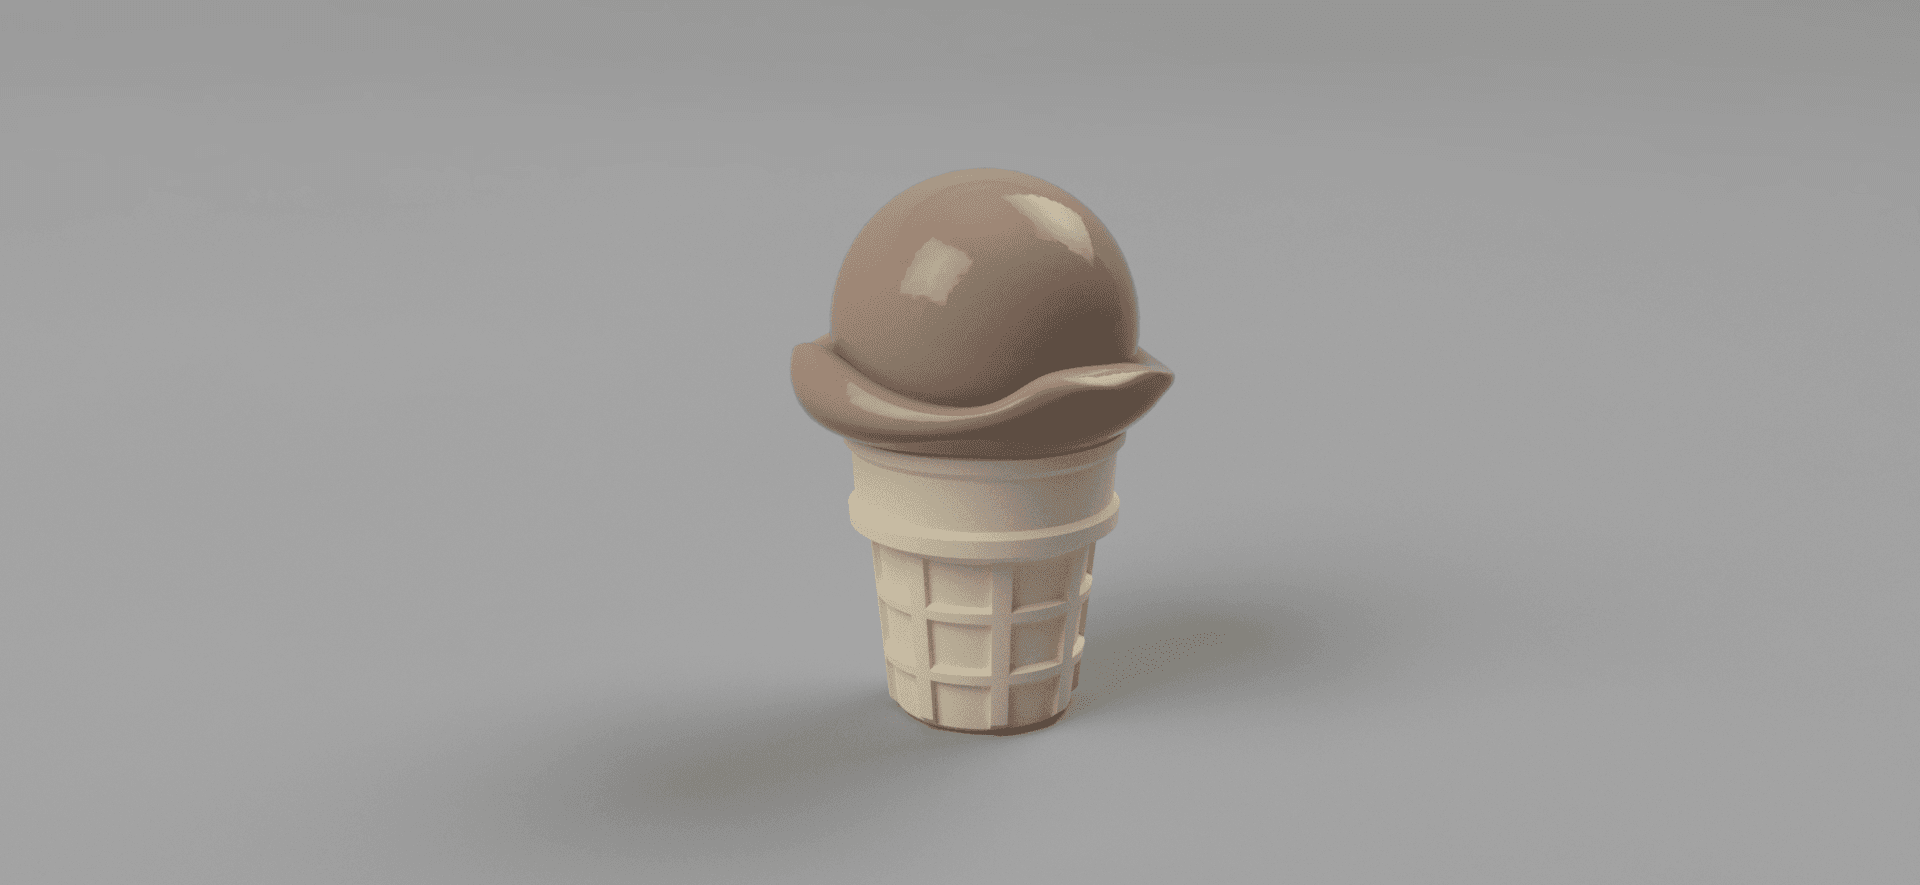 Novelty Ice Cream Cone Containers 3d model